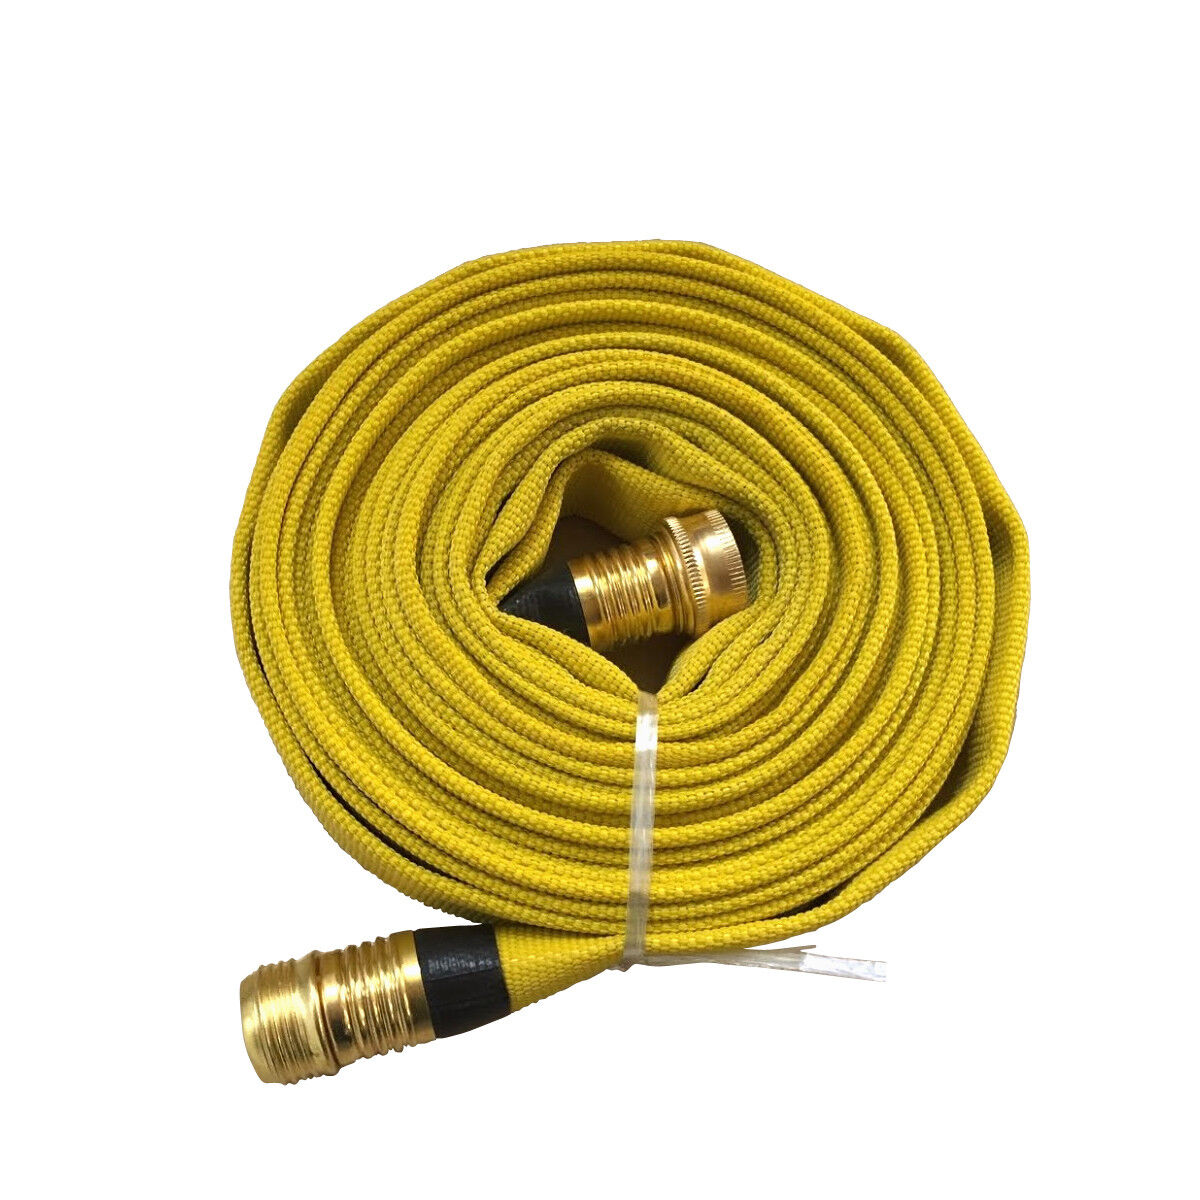 Forestry Grade Lay Flat Fire Hose with Garden Thread, YELLOW, 250 PSI